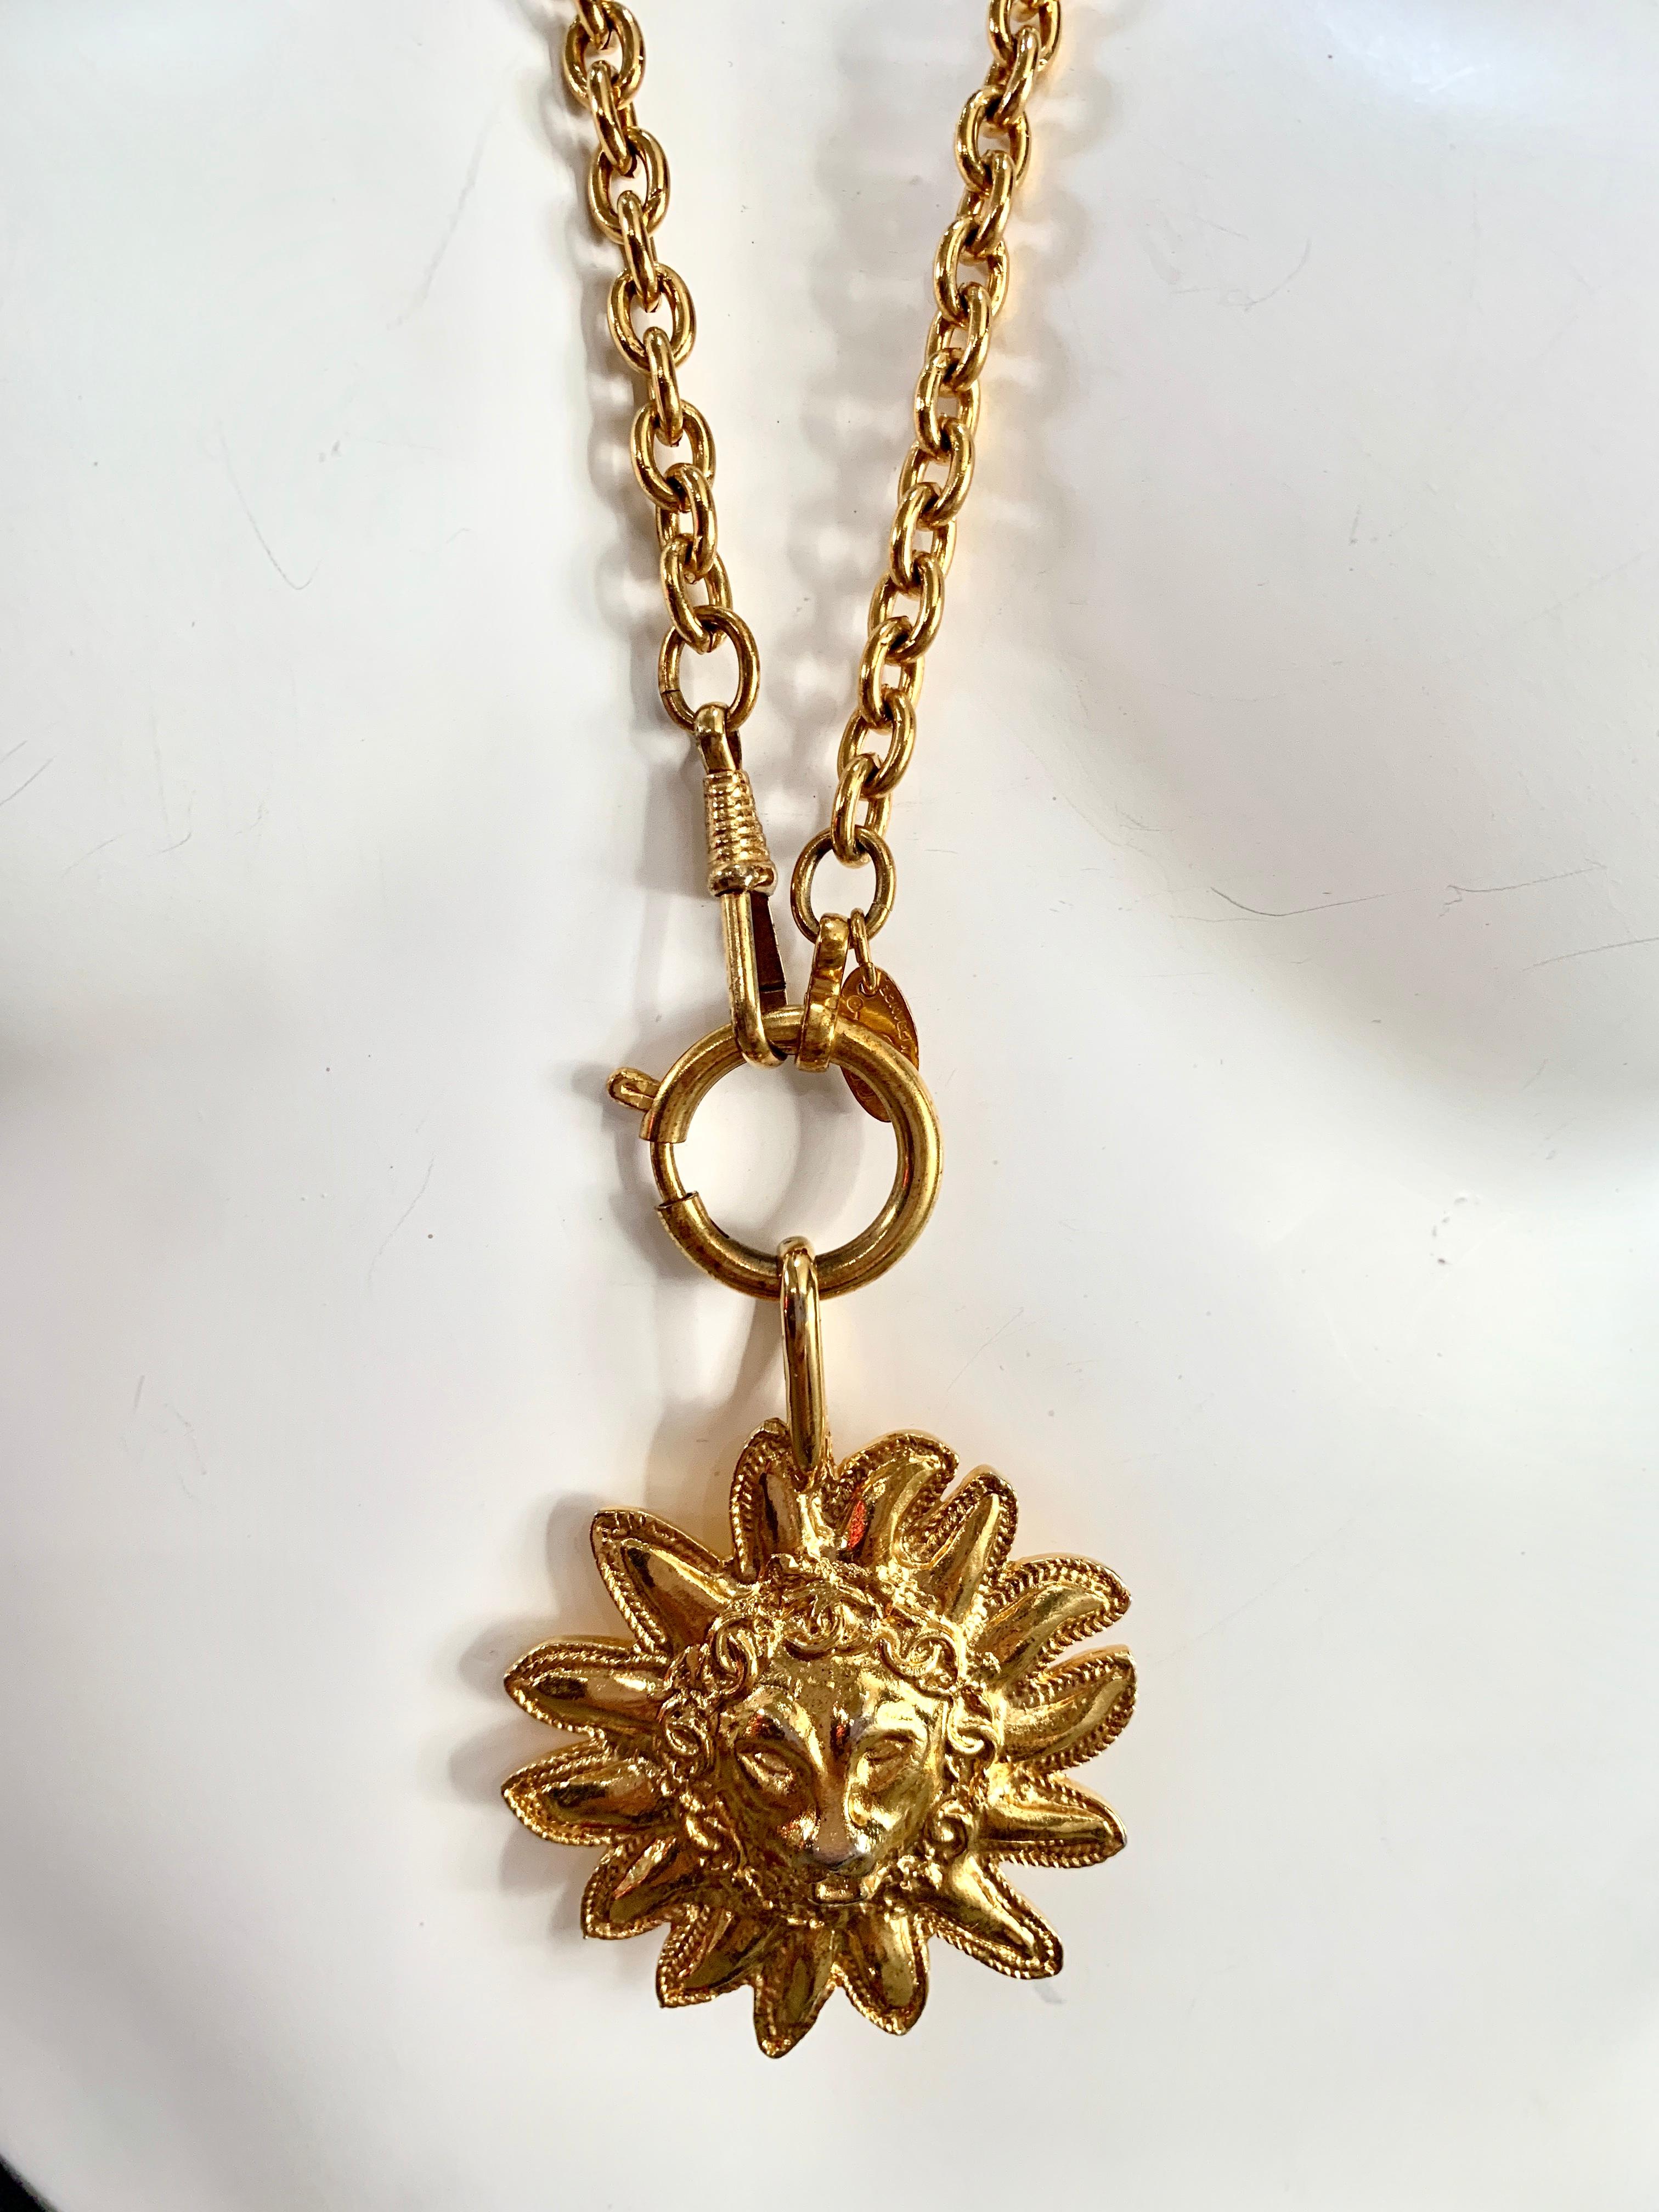 Gold Medallion Lion Vintage Chanel Necklace. 
Such a collector's item!
Marked on the underside with Chanel stamp. 

(No box) 